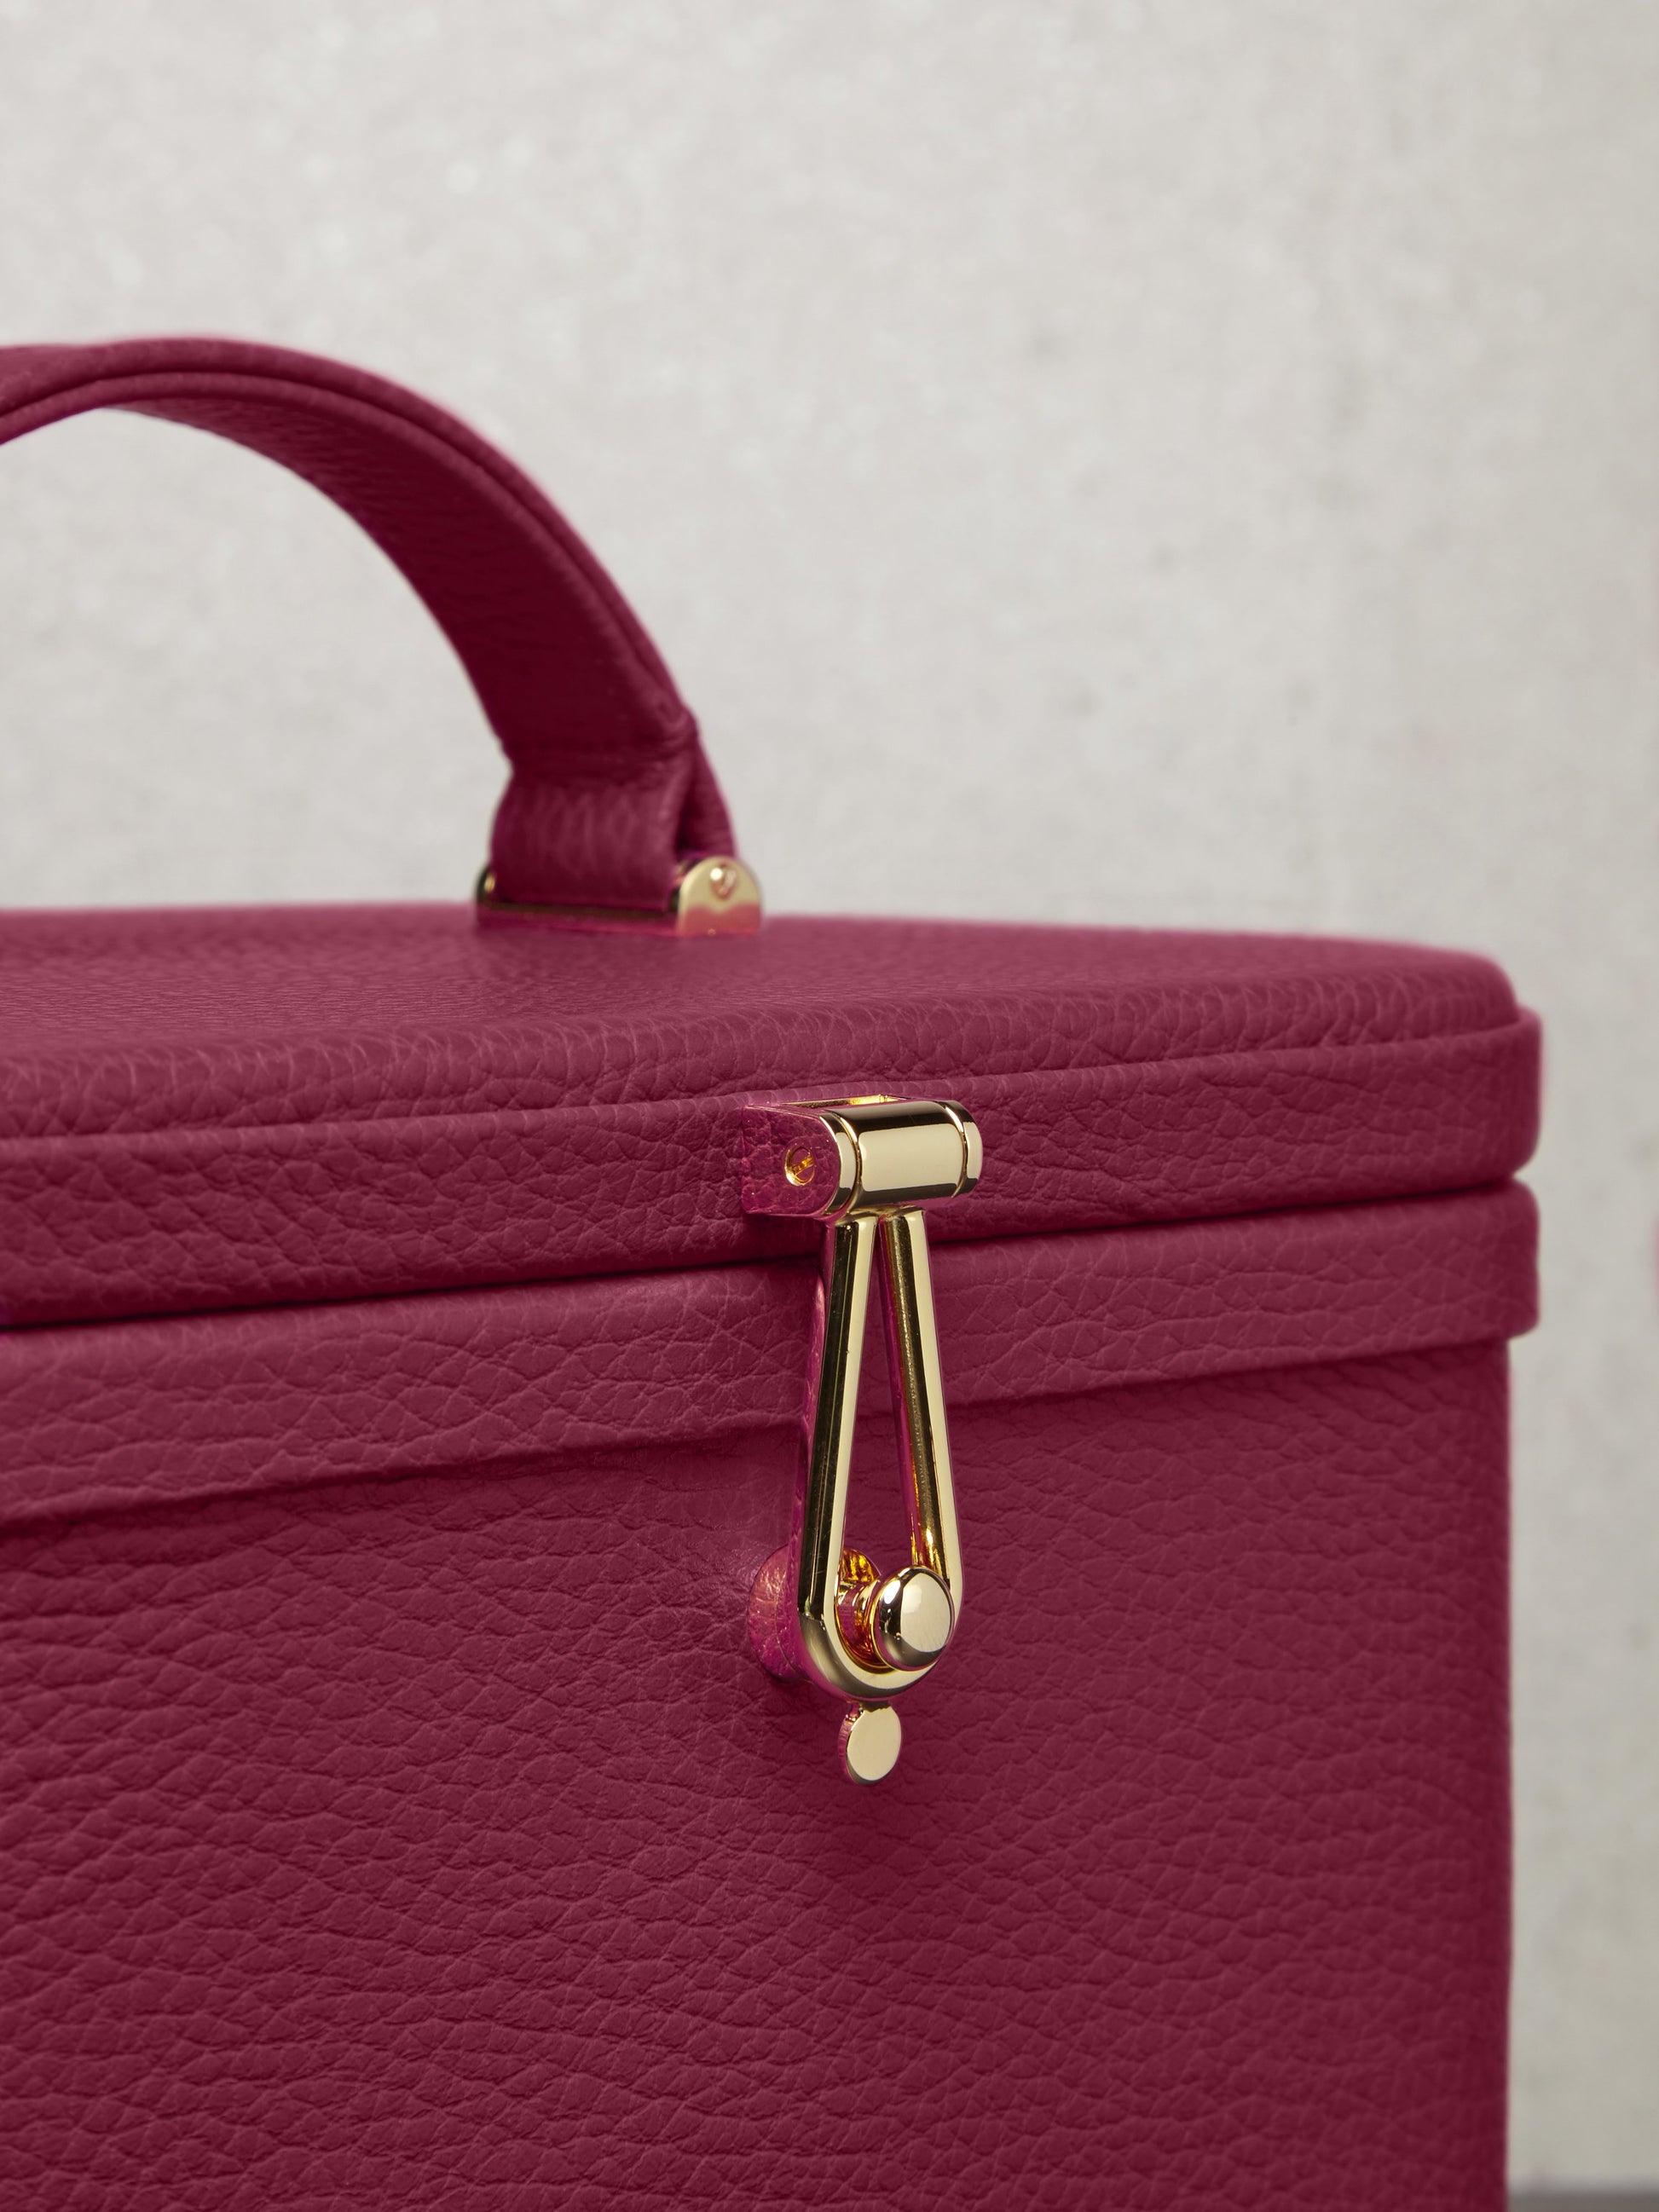 Atelier Verdi small pink leather vanity case, gold buckle detail